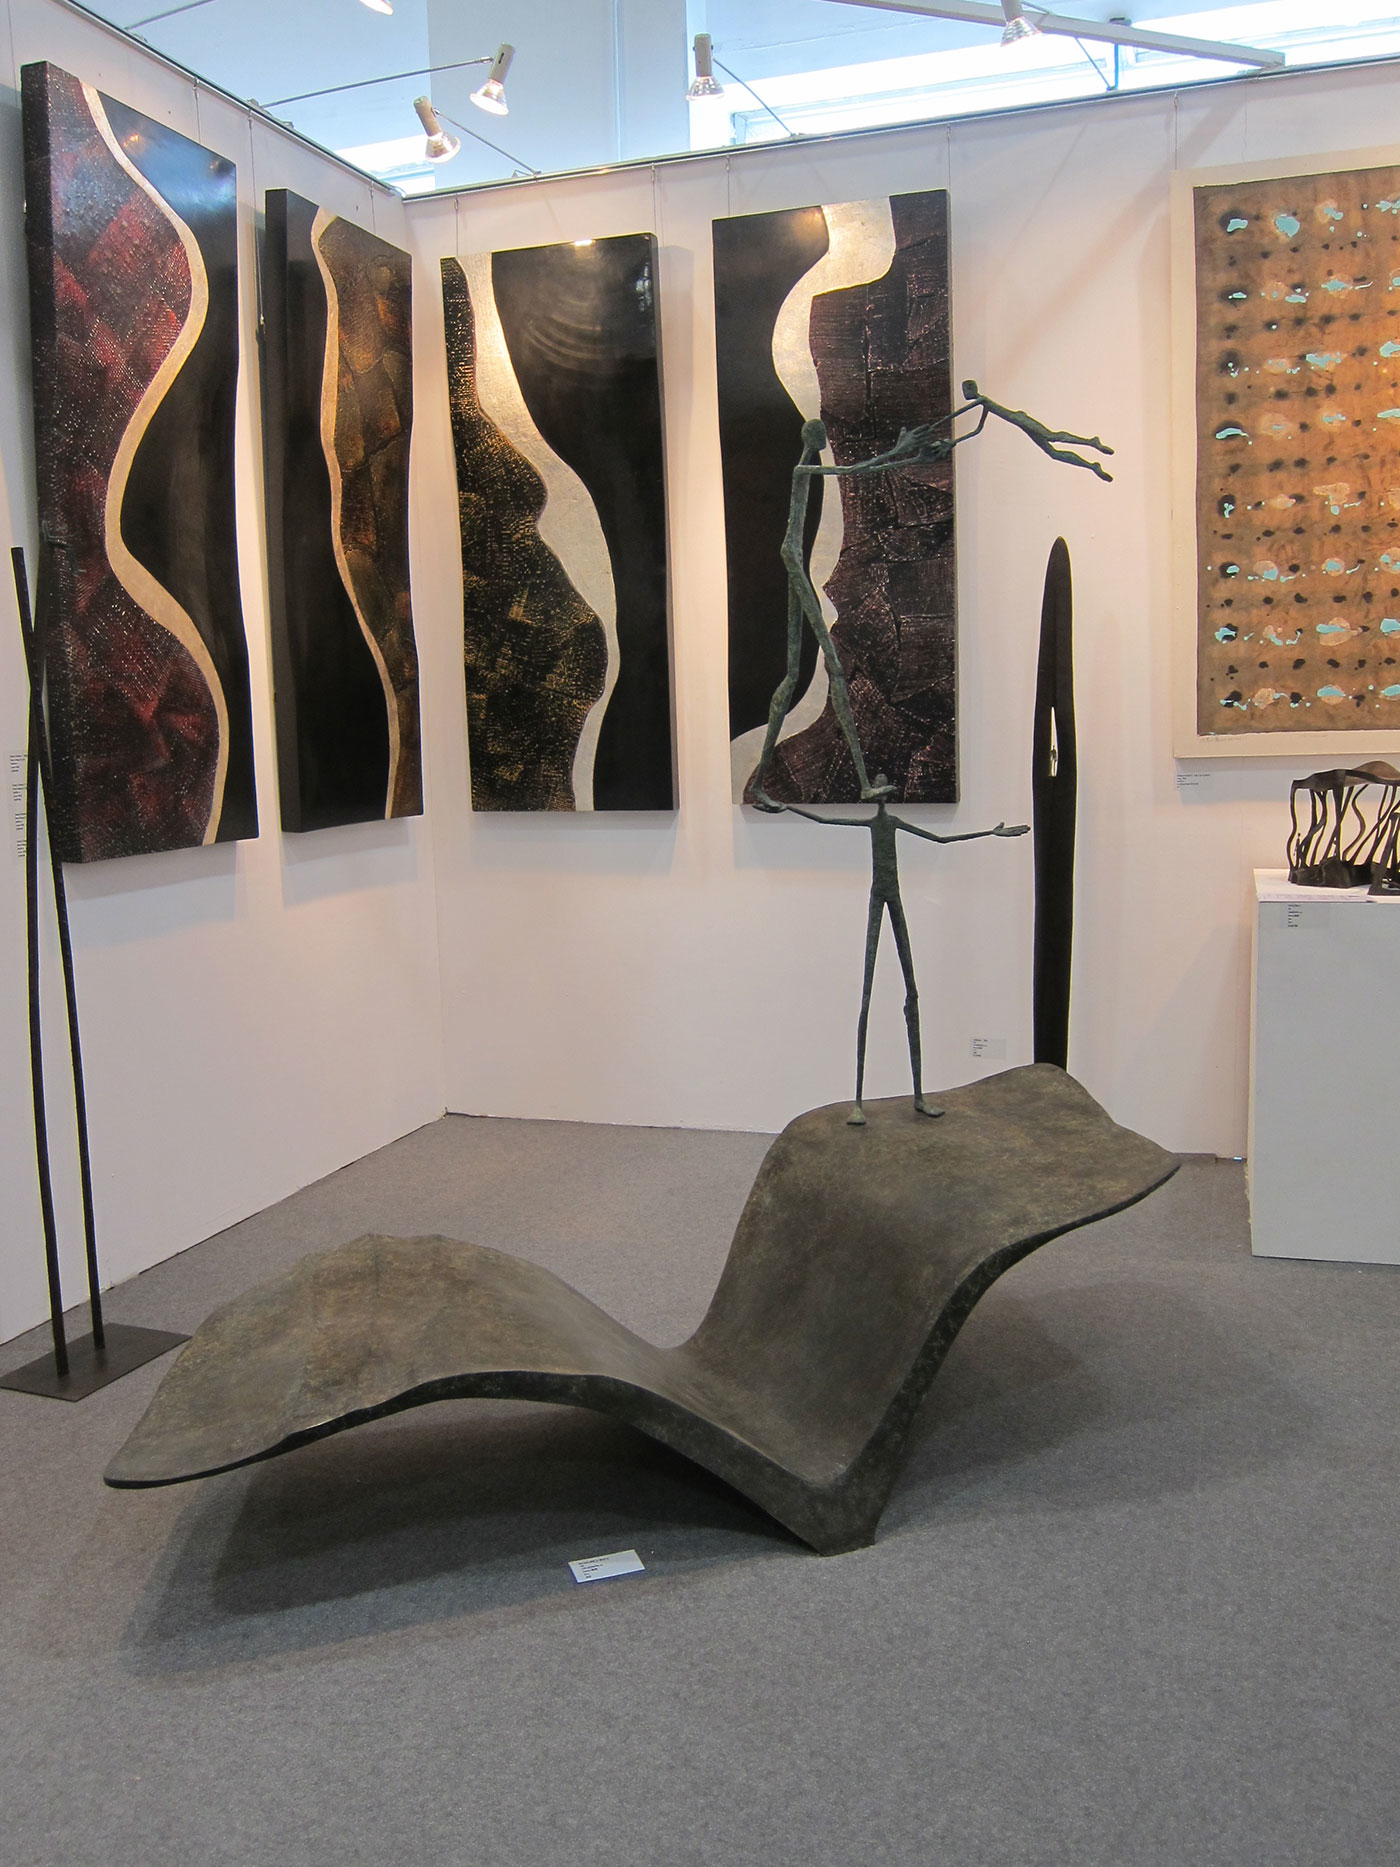 French sculptor Val - Valérie Goutard - with Philippe Staib Gallery at Art Taipei with Sculptureval